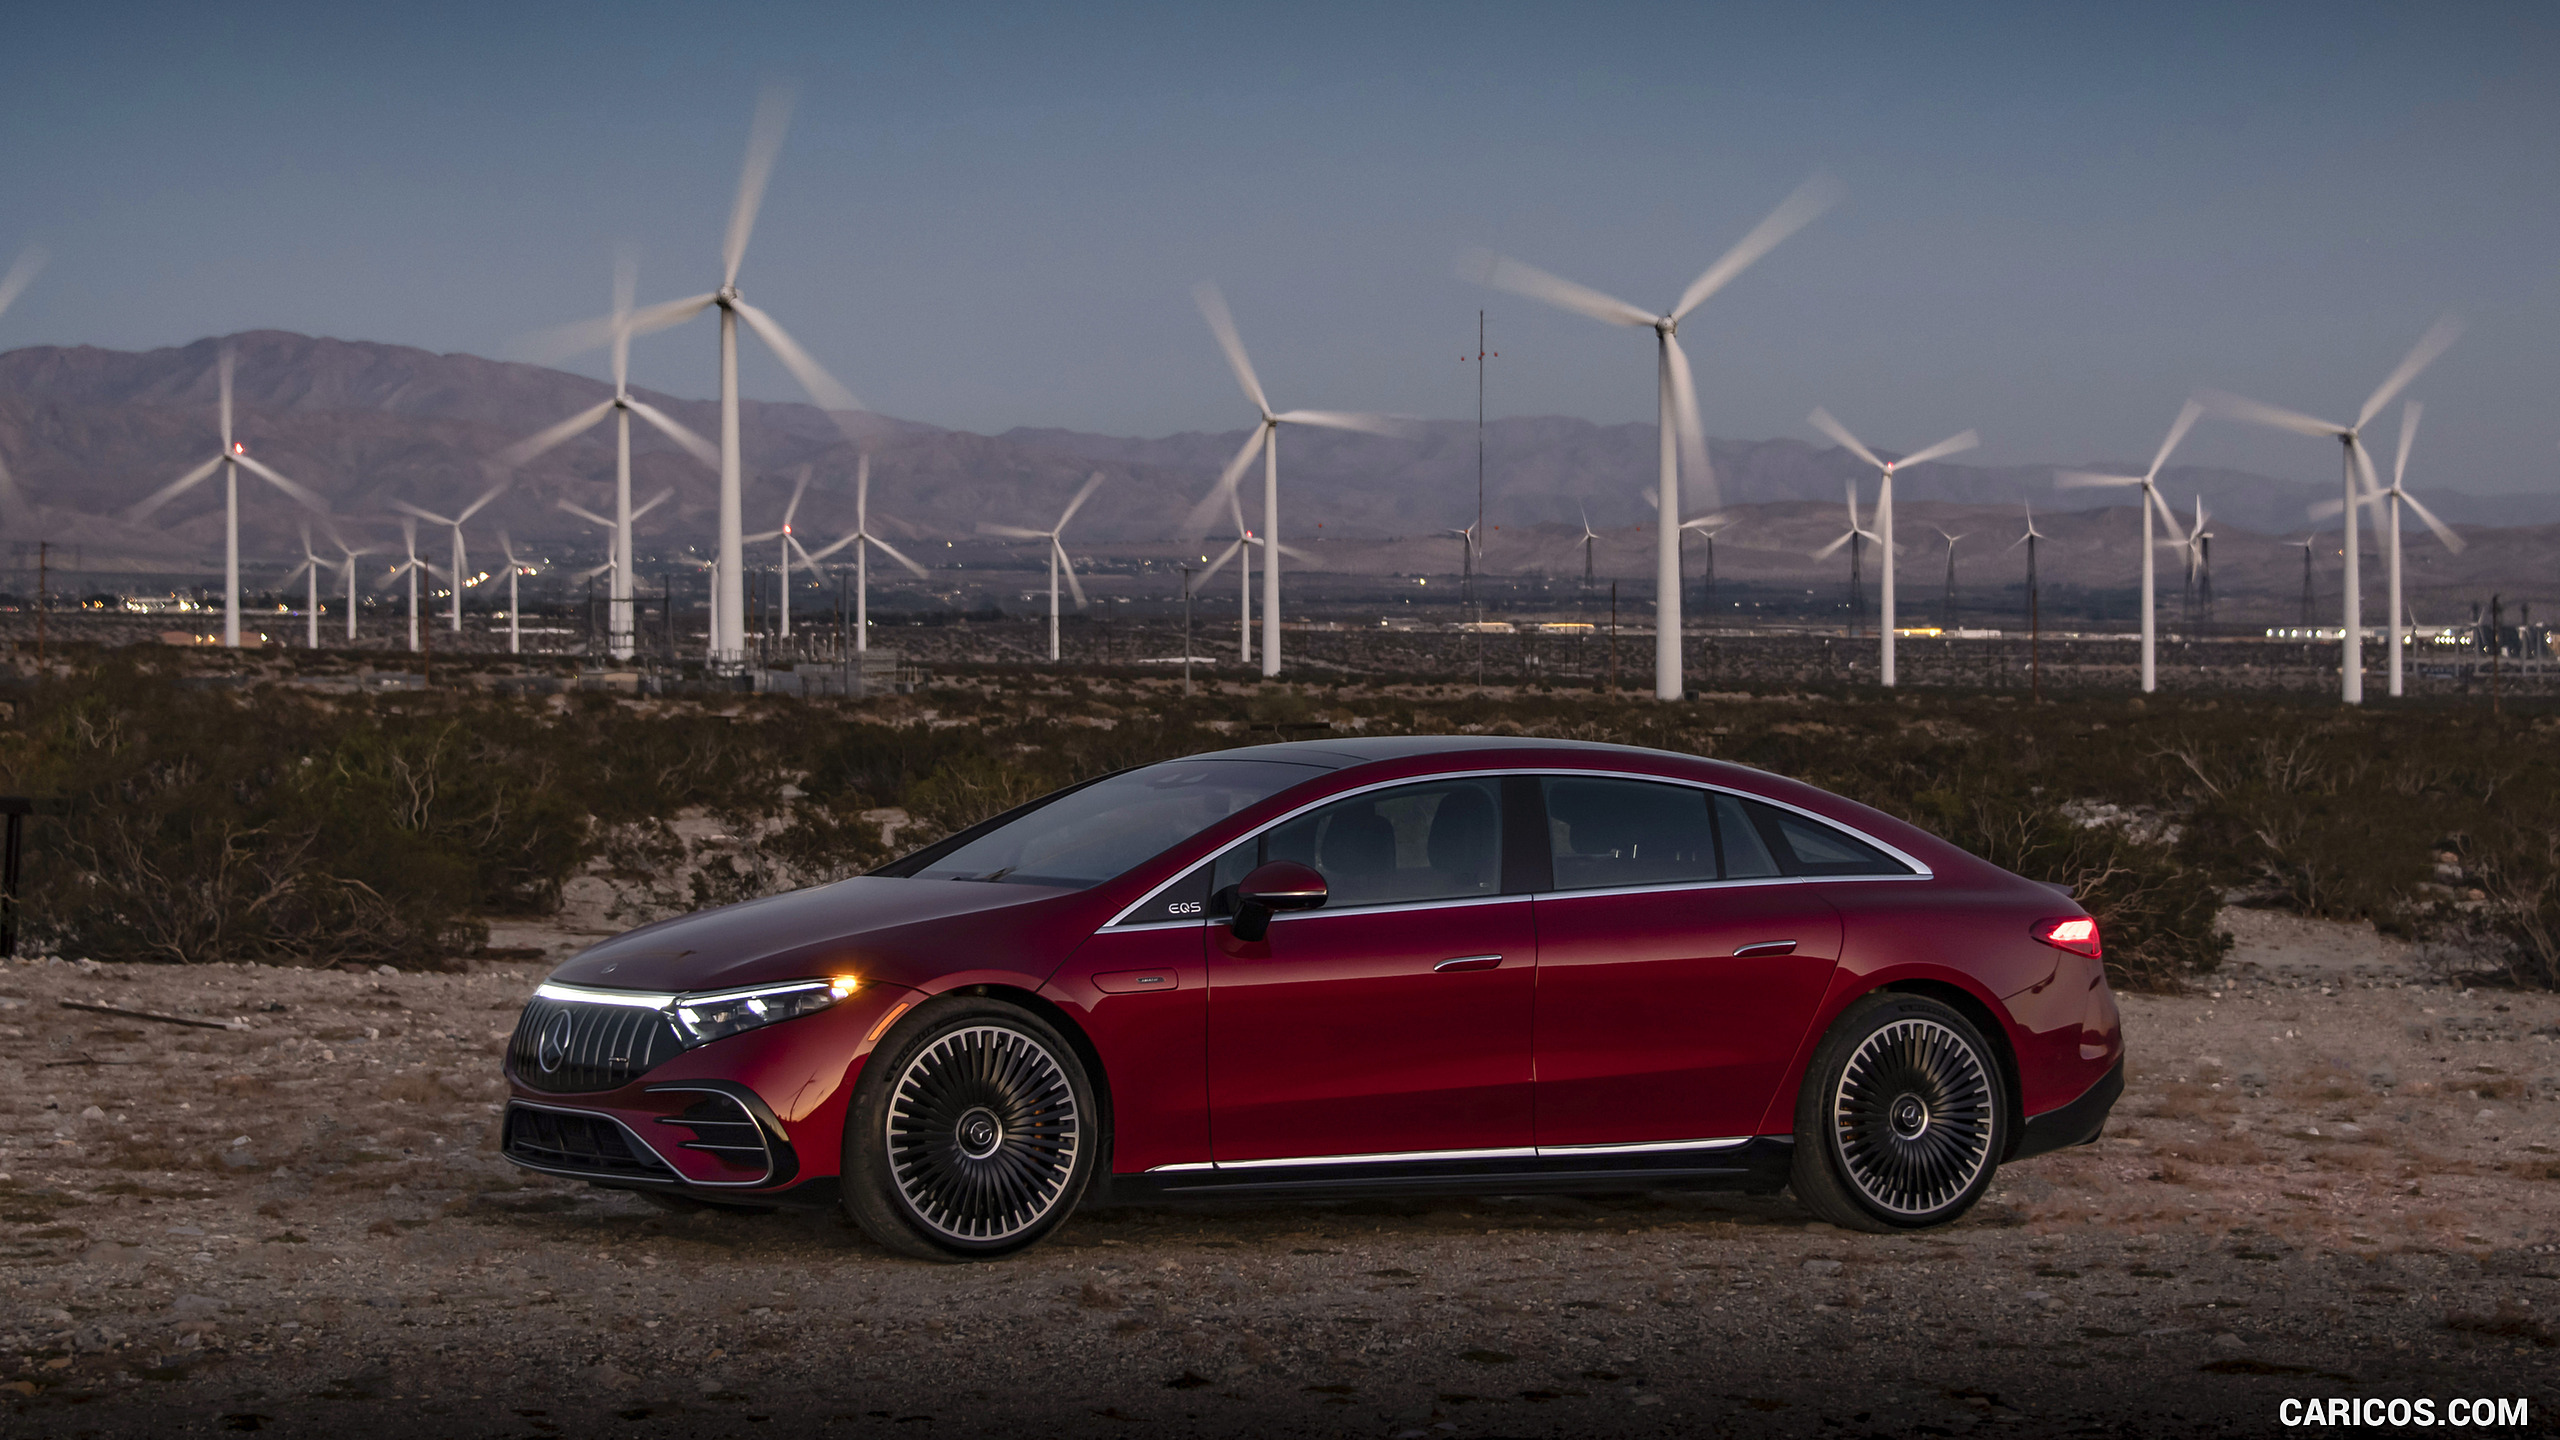 2022 Mercedes-AMG EQS 53 4MATIC+ (Color: Hyazinth Red Metallic) - Side, #45 of 76